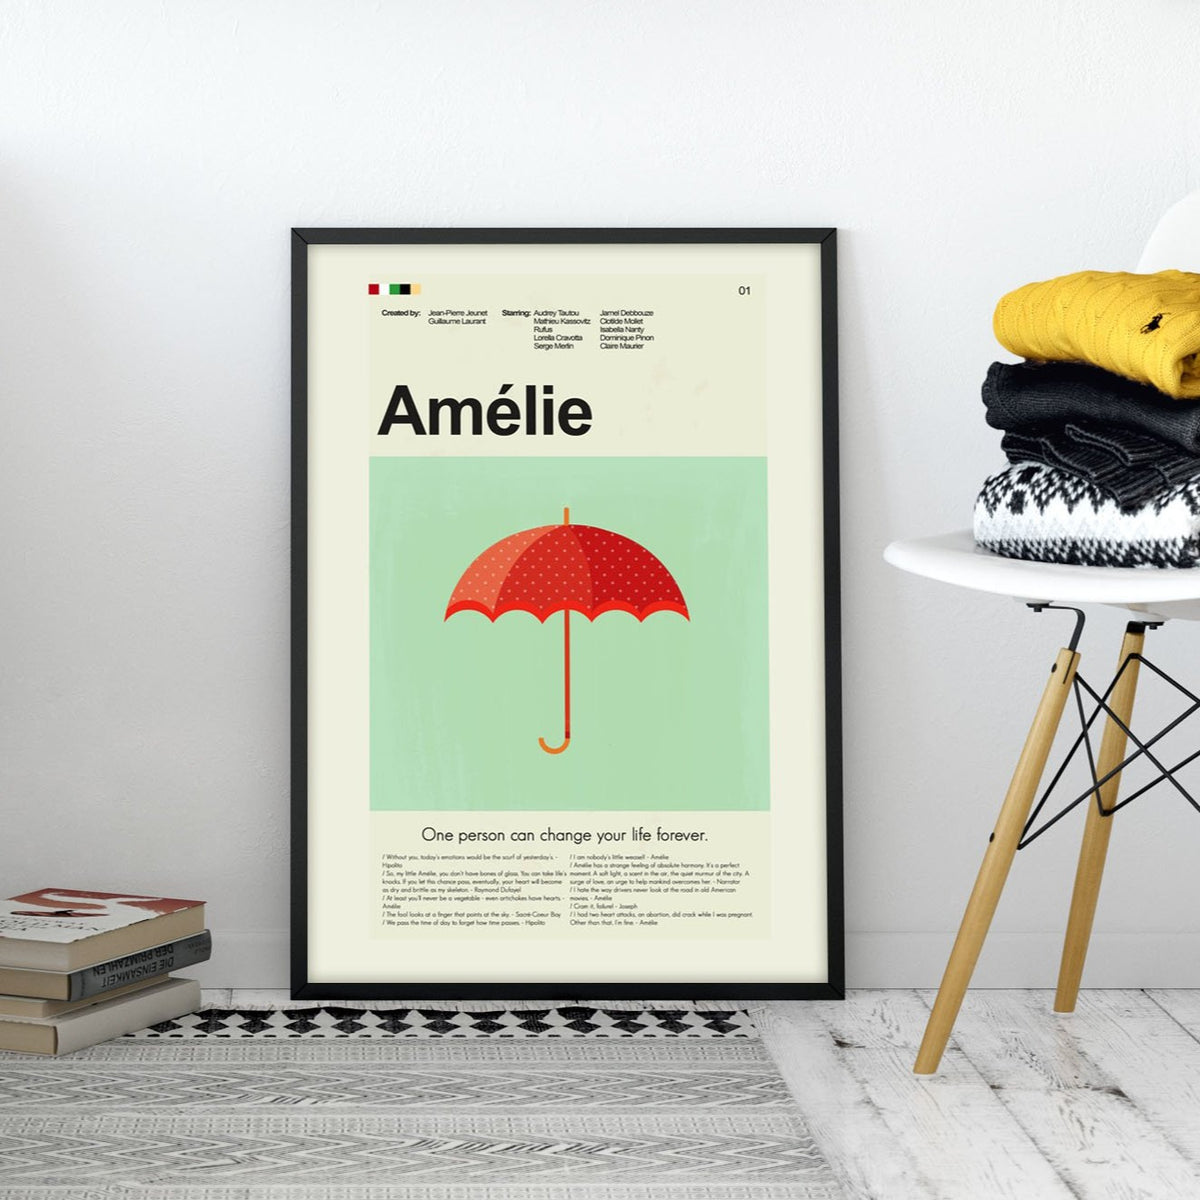 Amelie - Red Polka Dot Umbrella | 12"x18" or 18"x24" Print only